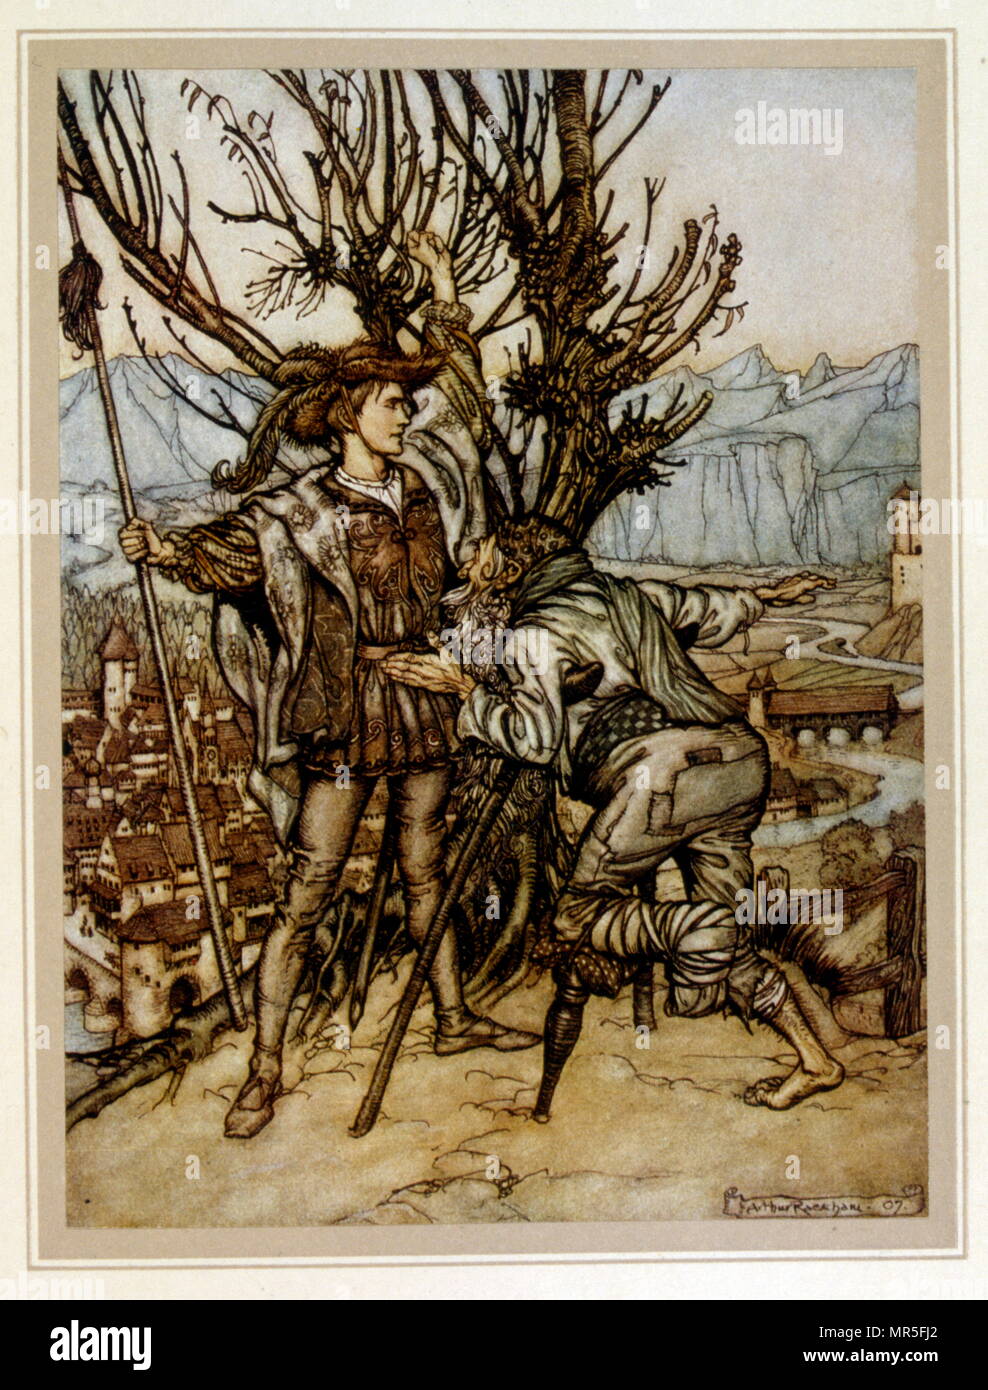 Illustration of a prince meeting n elderly cripple. From the 1922 edition of 'Le Printemps sur la Neige' by Charles  by Arthur Rackham Stock Photo